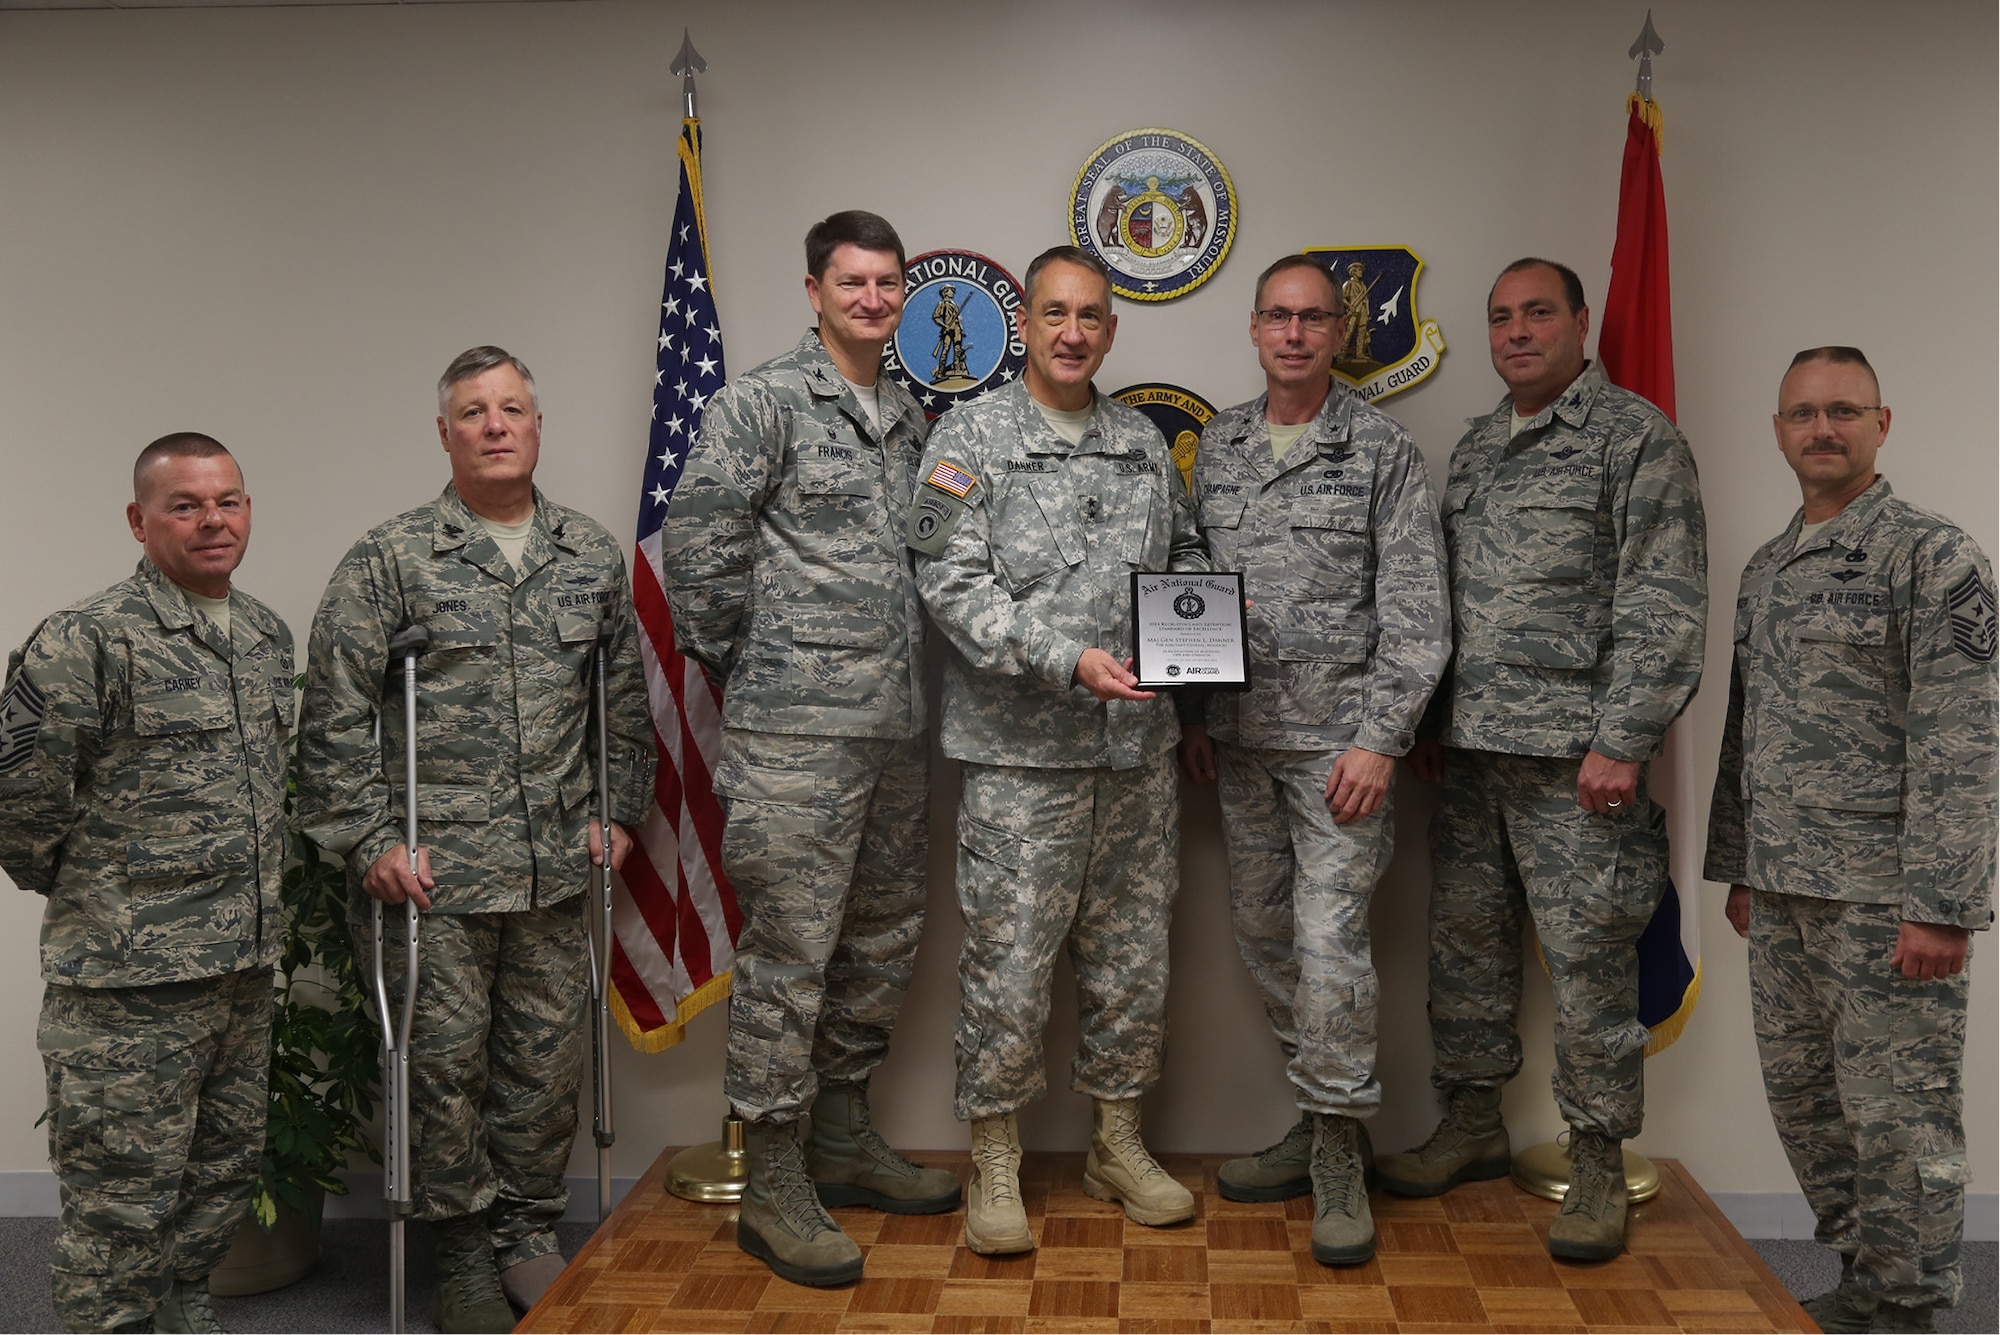 Maj. Gen. Steve Danner, the adjutant general of the Missouri National Guard, presented an award for achieving and maintaining 100 percent end strength for fiscal year 2014 to the commanders, command chiefs and representatives of the 131st Bomb Wing and the 139th Airlift Wing, Nov. 6, 2015 at the Missouri National Guard Headquarters in Jefferson City, Mo. (U.S. Army National Guard photo by Sgt. Mariah Best)
